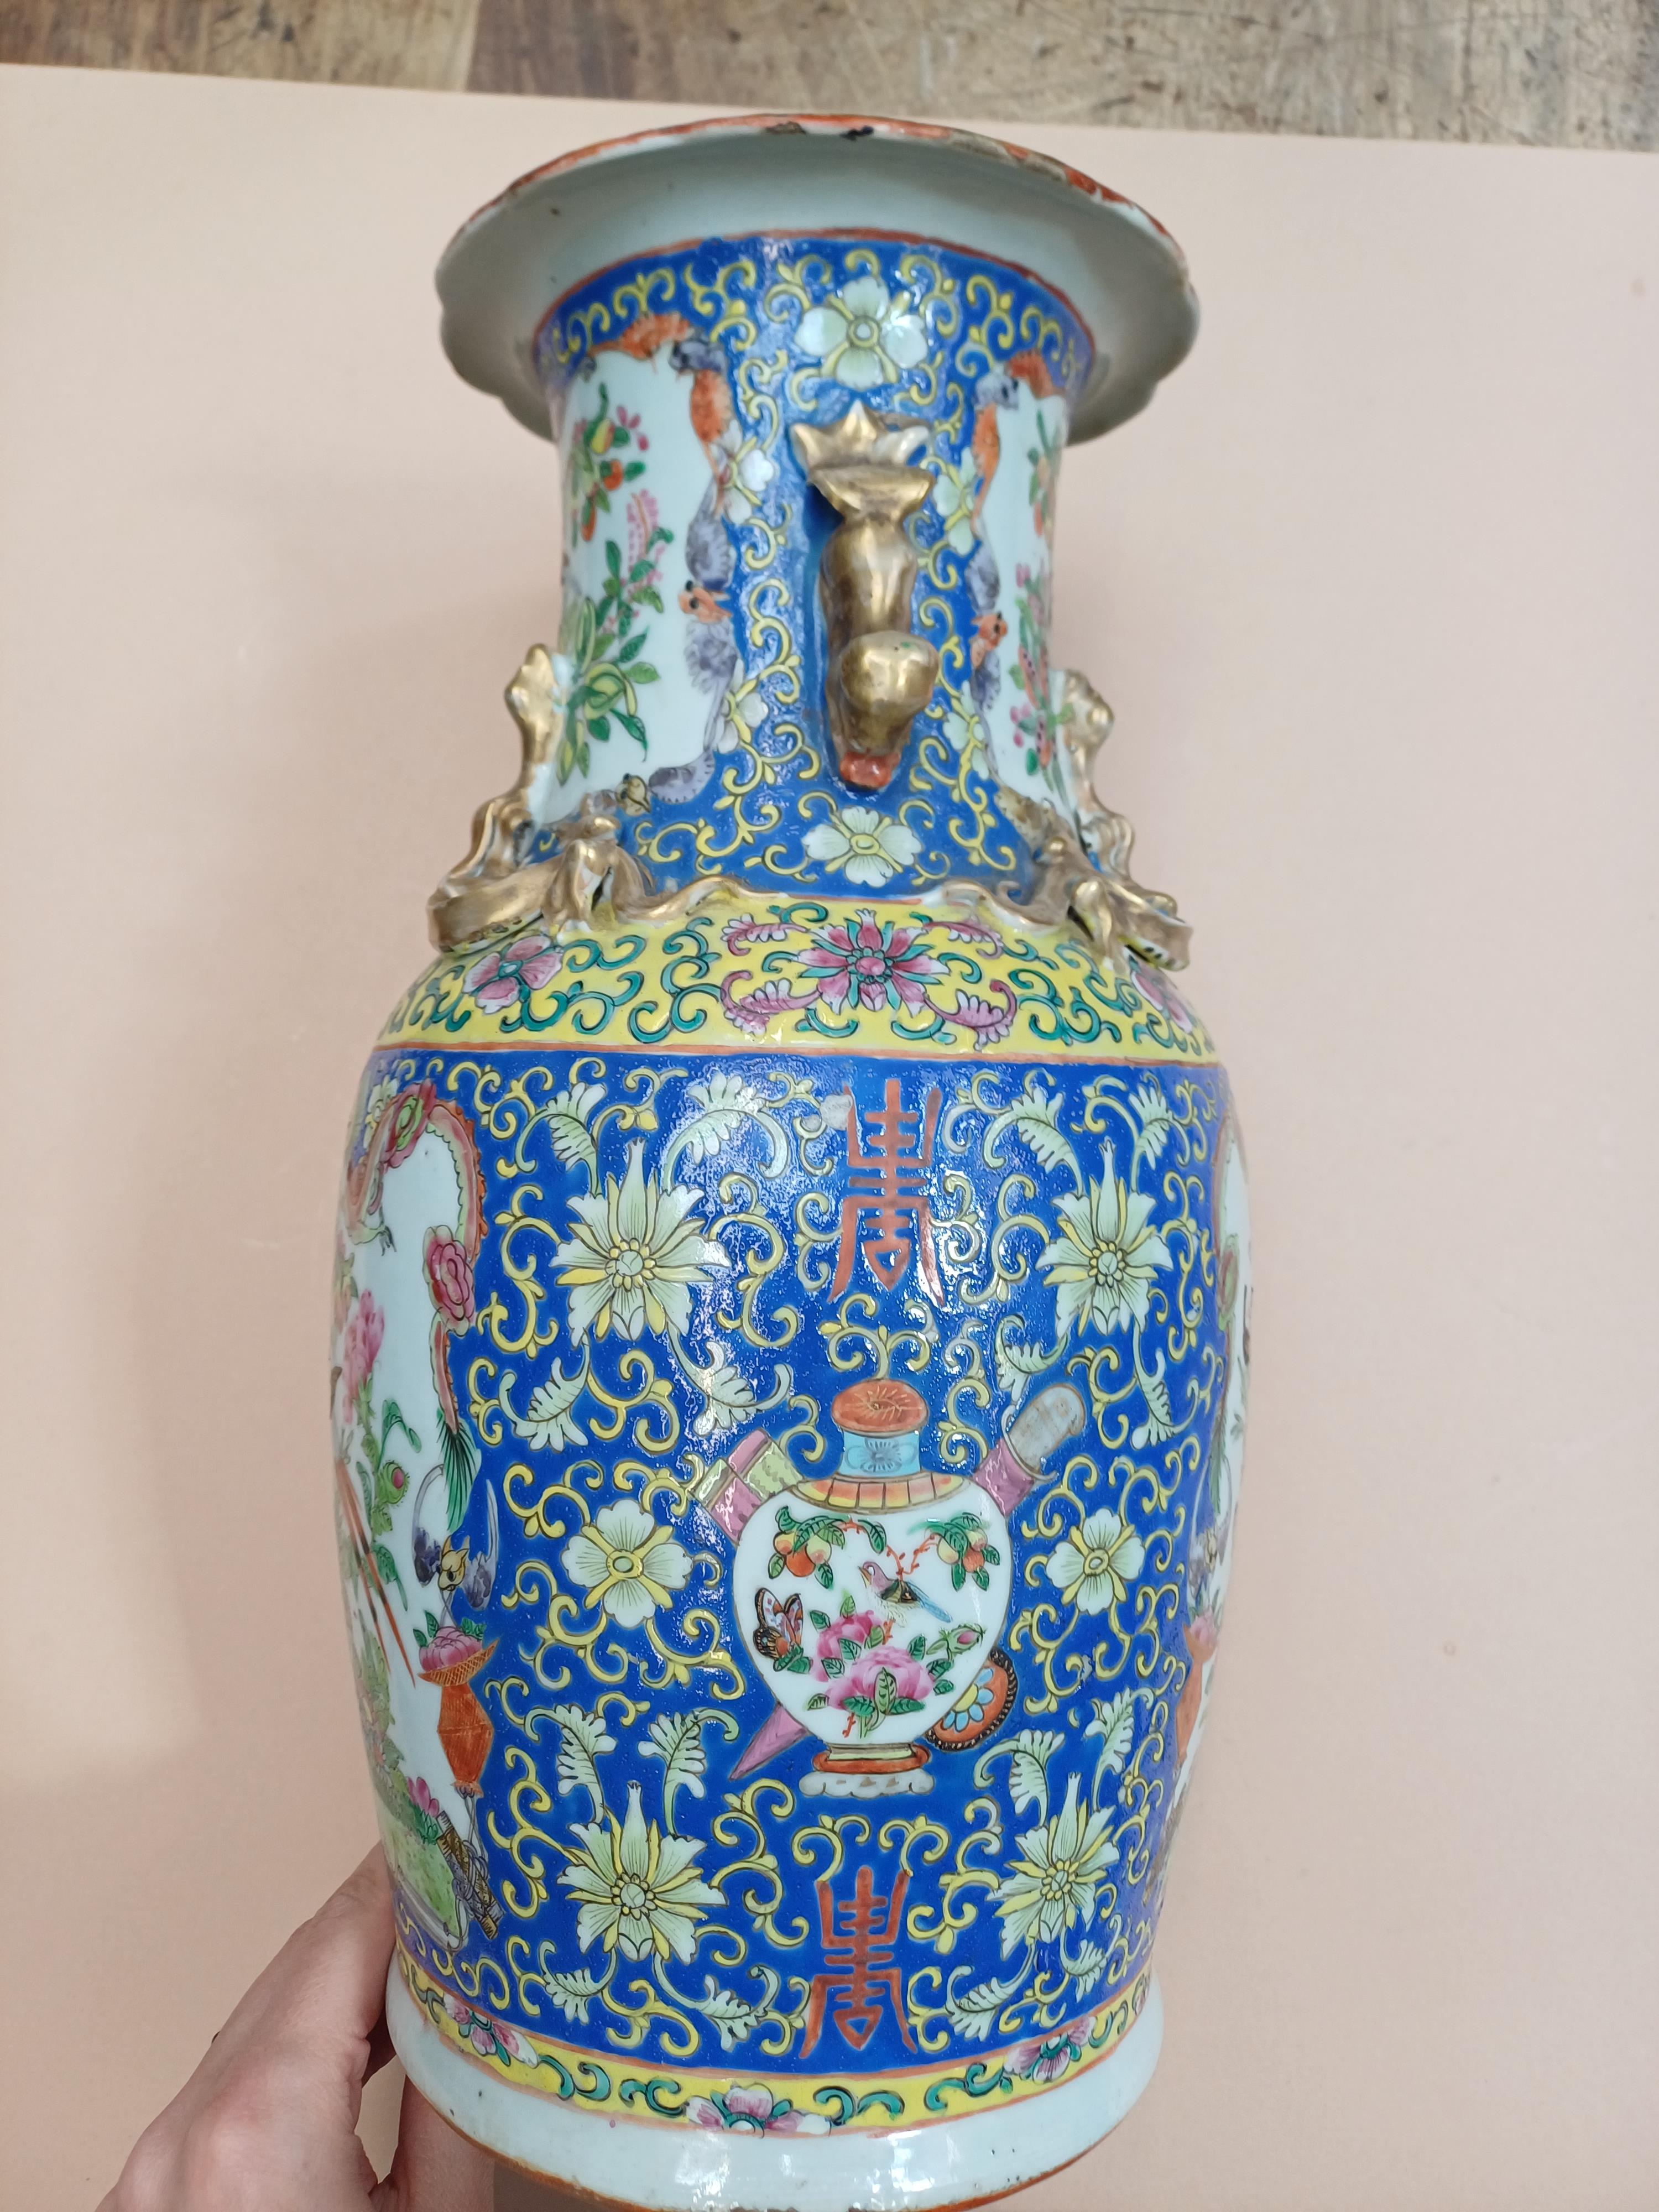 A PAIR OF CHINESE CANTON FAMILLE-ROSE VASES 十九或二十世紀 廣彩花鳥圖紋瓶一對 - Image 8 of 14